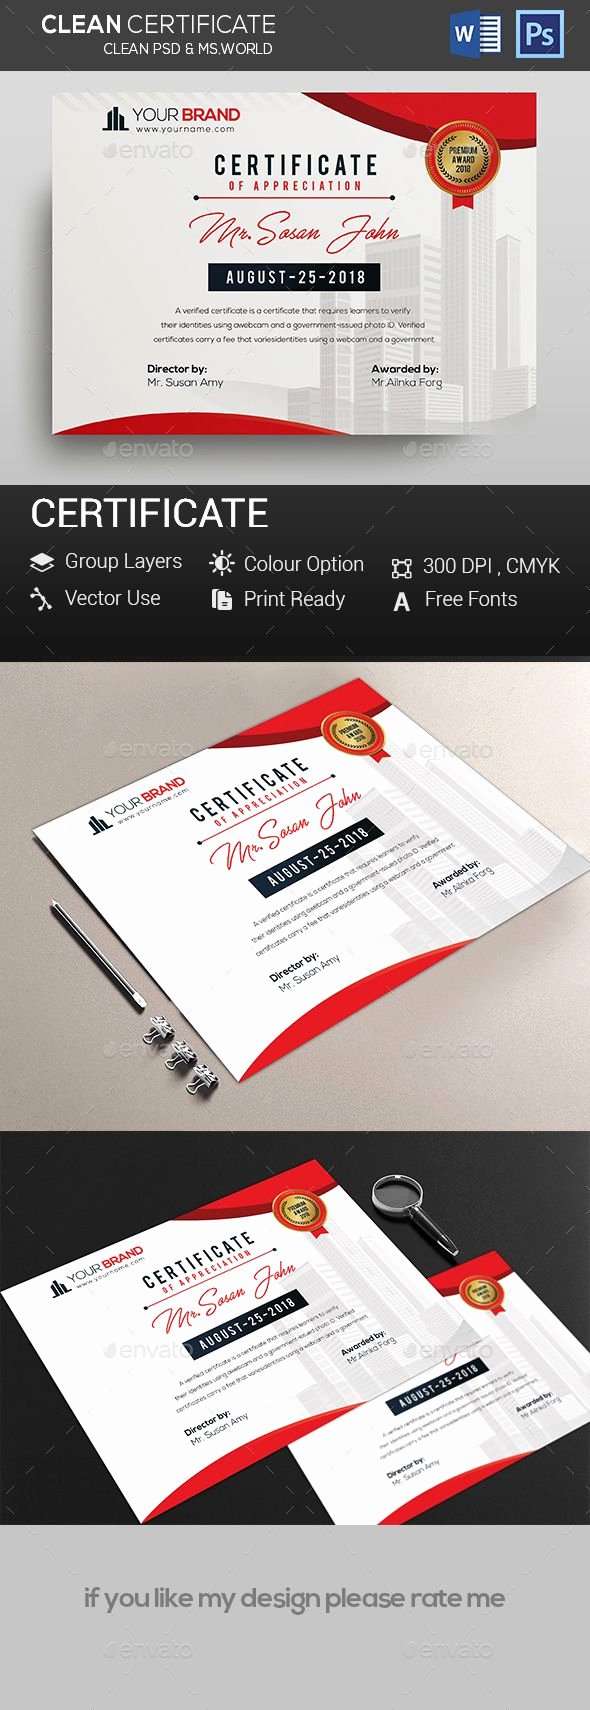 Above and Beyond Certificate Template Fresh Best 25 Free Certificate Templates Ideas On Pinterest